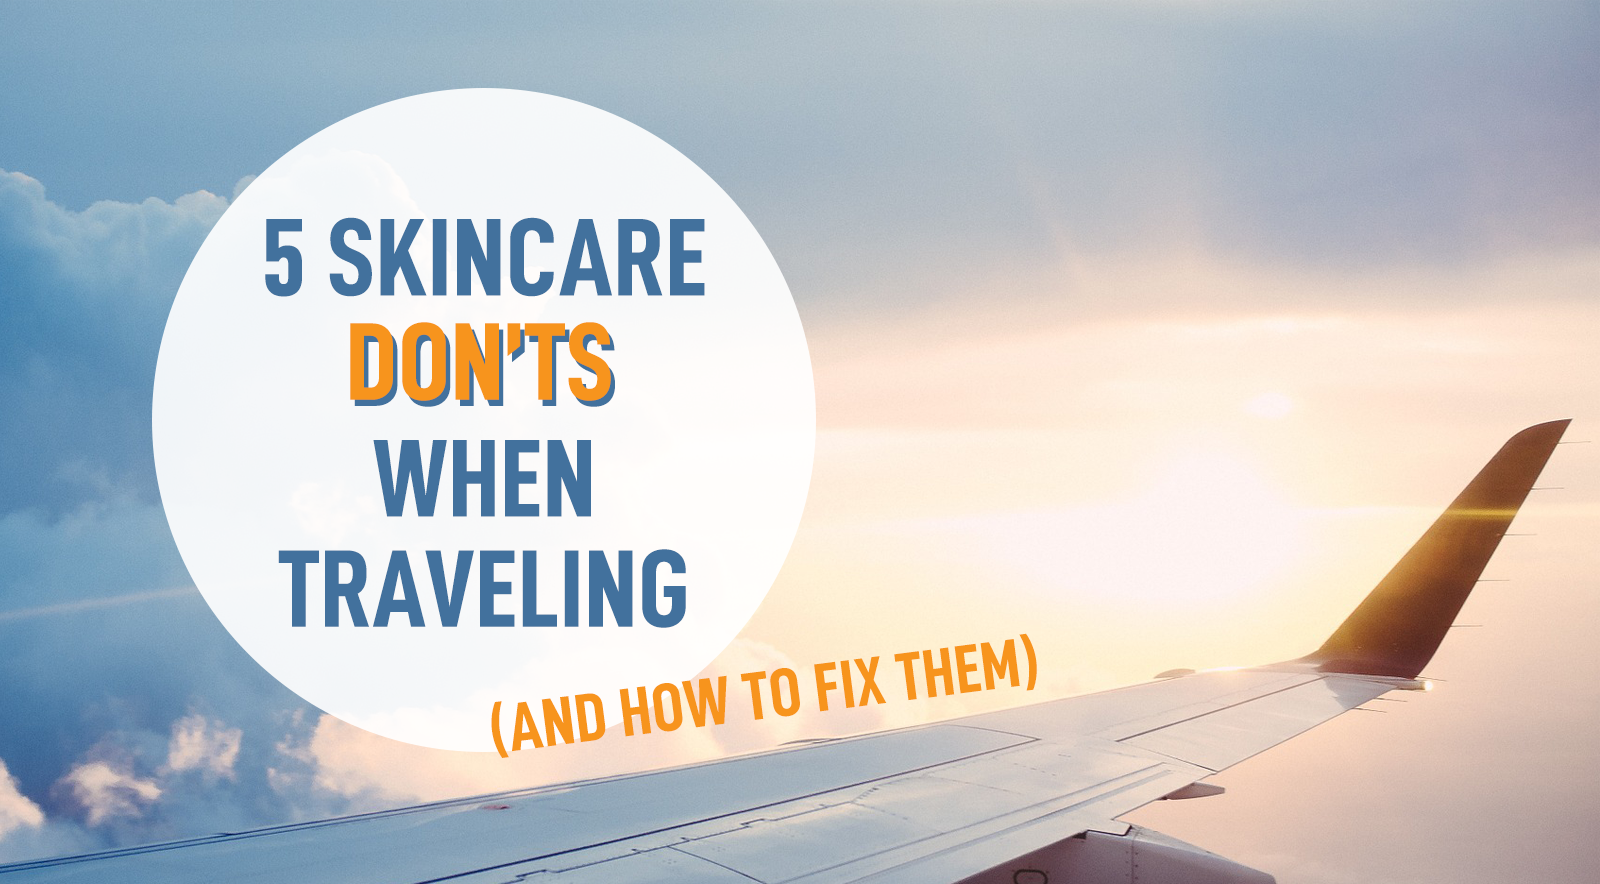 5 SKINCARE DON'TS WHEN TRAVELING | by DERMABELL